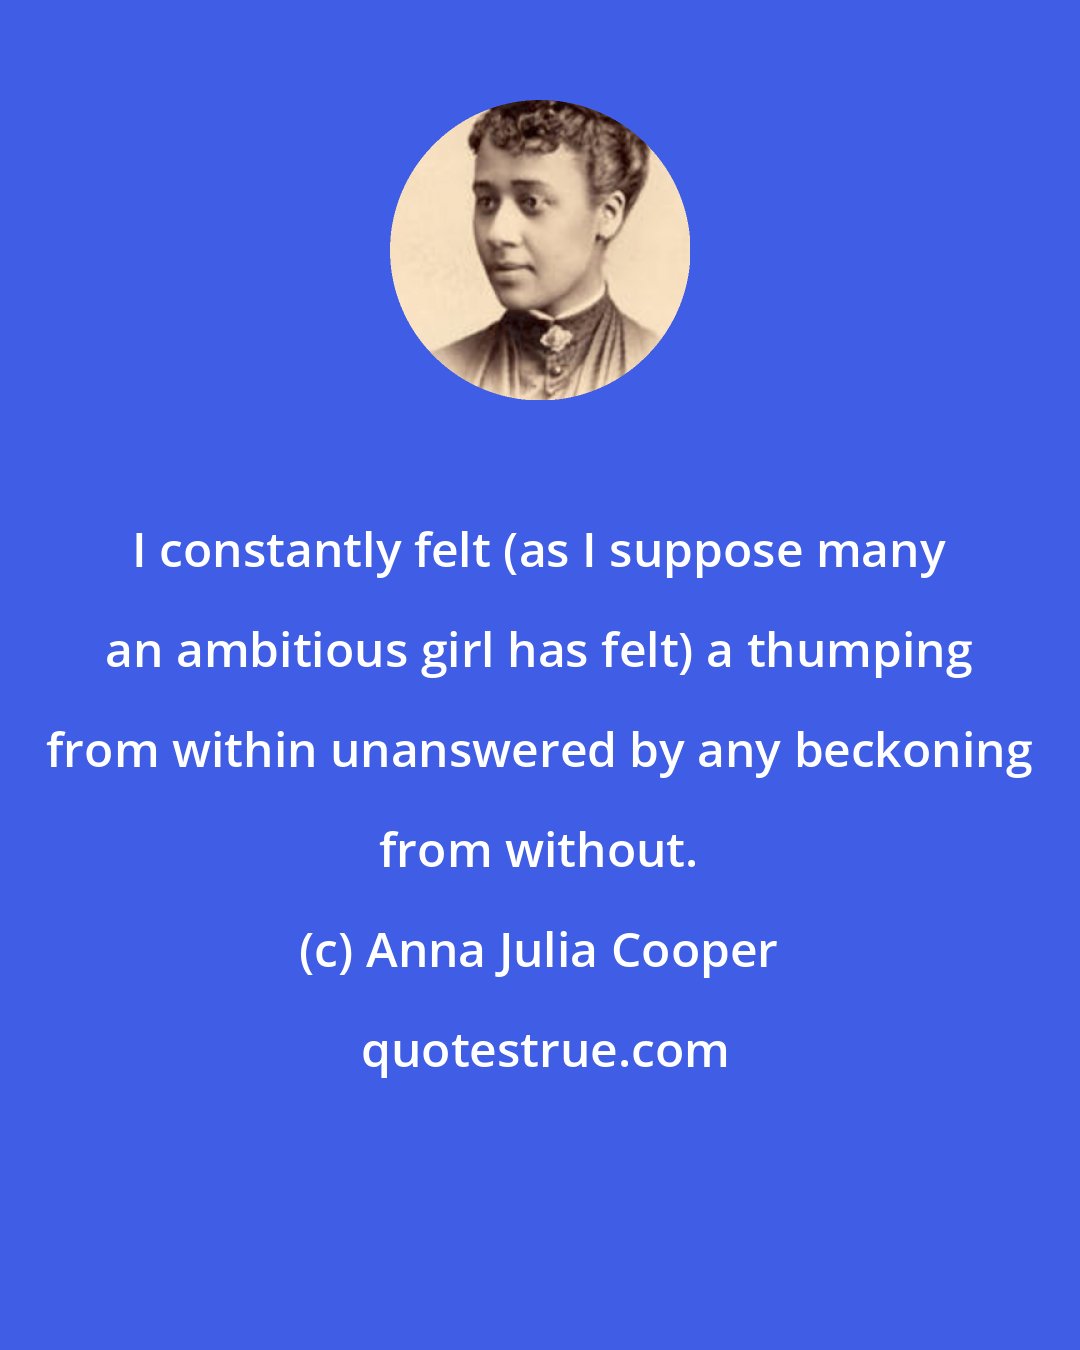 Anna Julia Cooper: I constantly felt (as I suppose many an ambitious girl has felt) a thumping from within unanswered by any beckoning from without.